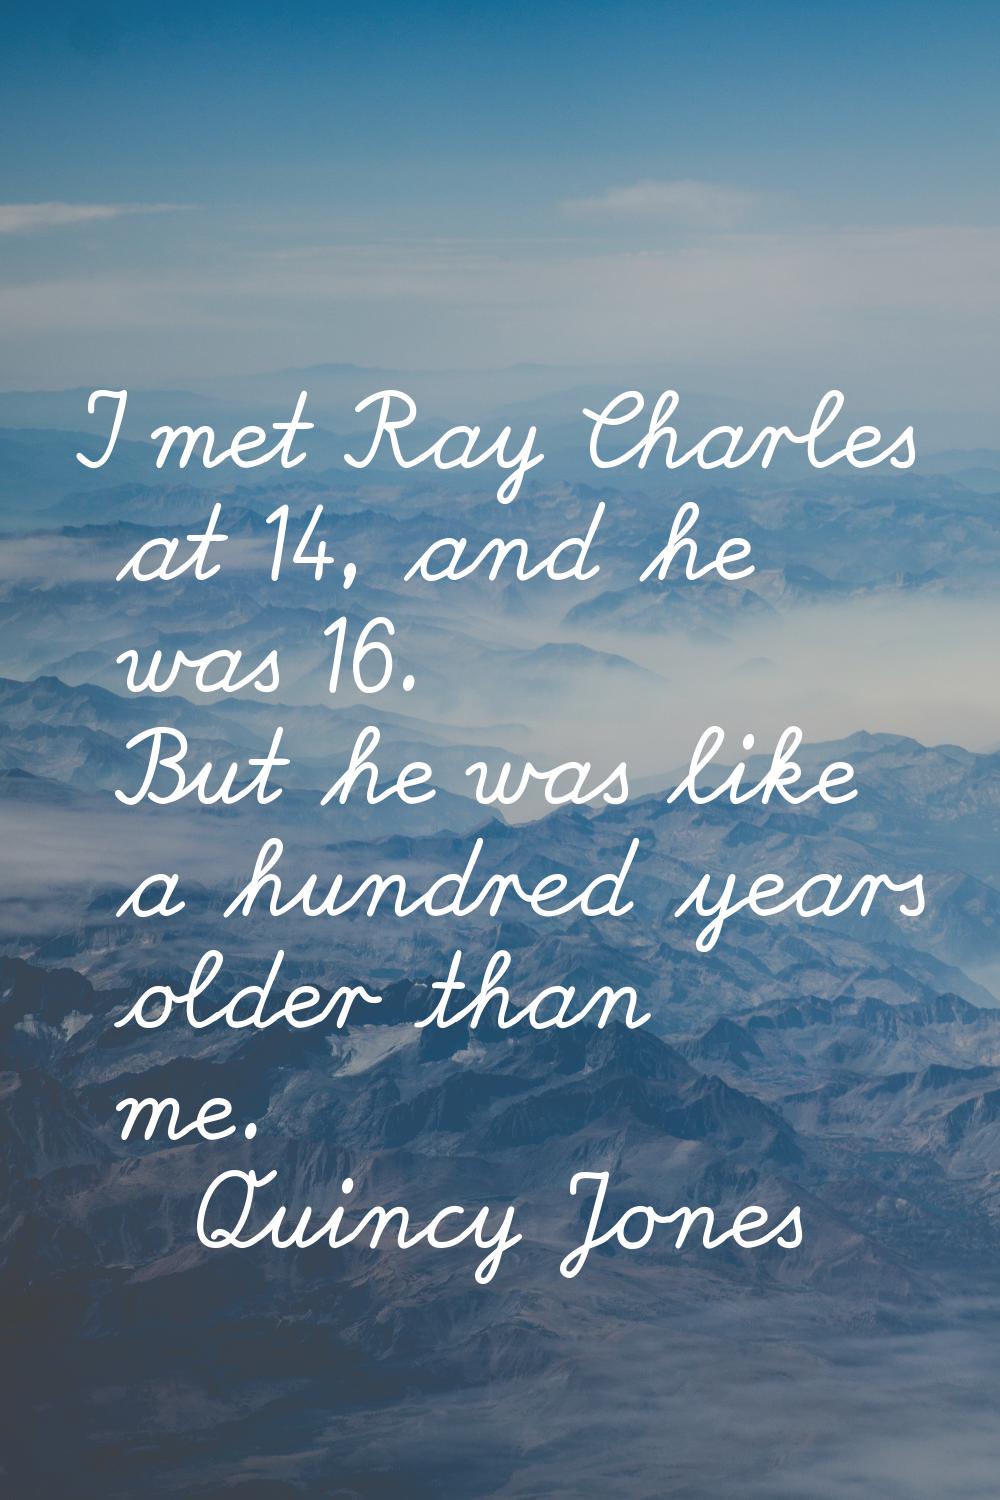 I met Ray Charles at 14, and he was 16. But he was like a hundred years older than me.